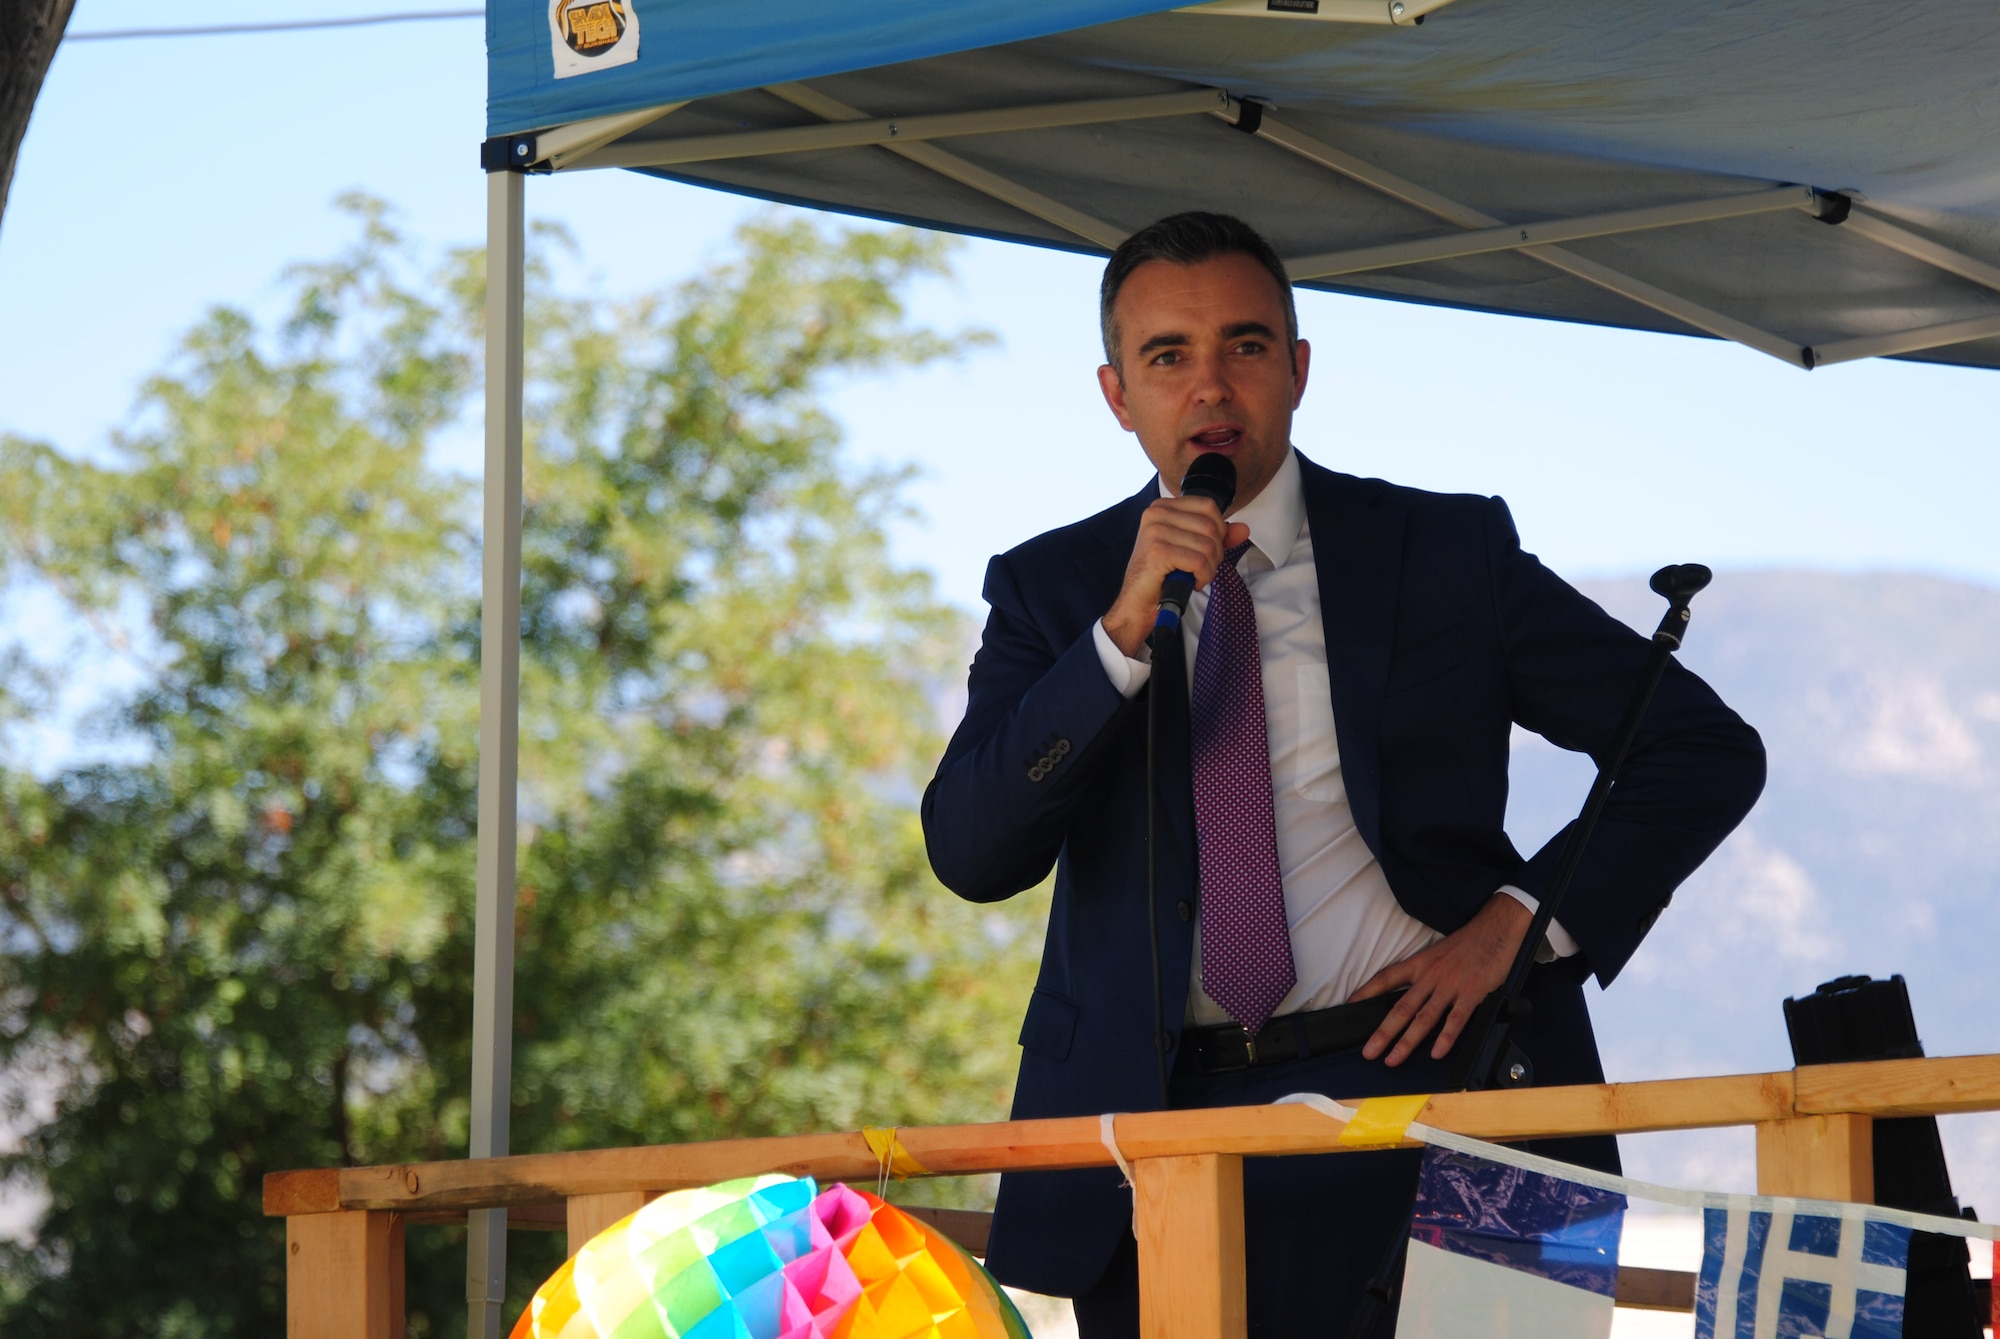 Keynote speaker Albuquerque District Attorney Raul Torrez
speaks at the 2018 Hispanic Heritage Diversity Day event at Hardin Field here Sept. 27. This year's event featured the Al Hurricane Jr. Band. There was also a car show, an art show, food trucks and a samba sizzle Latin dance workout. (U.S. Air Force photo by Jessie Perkins)